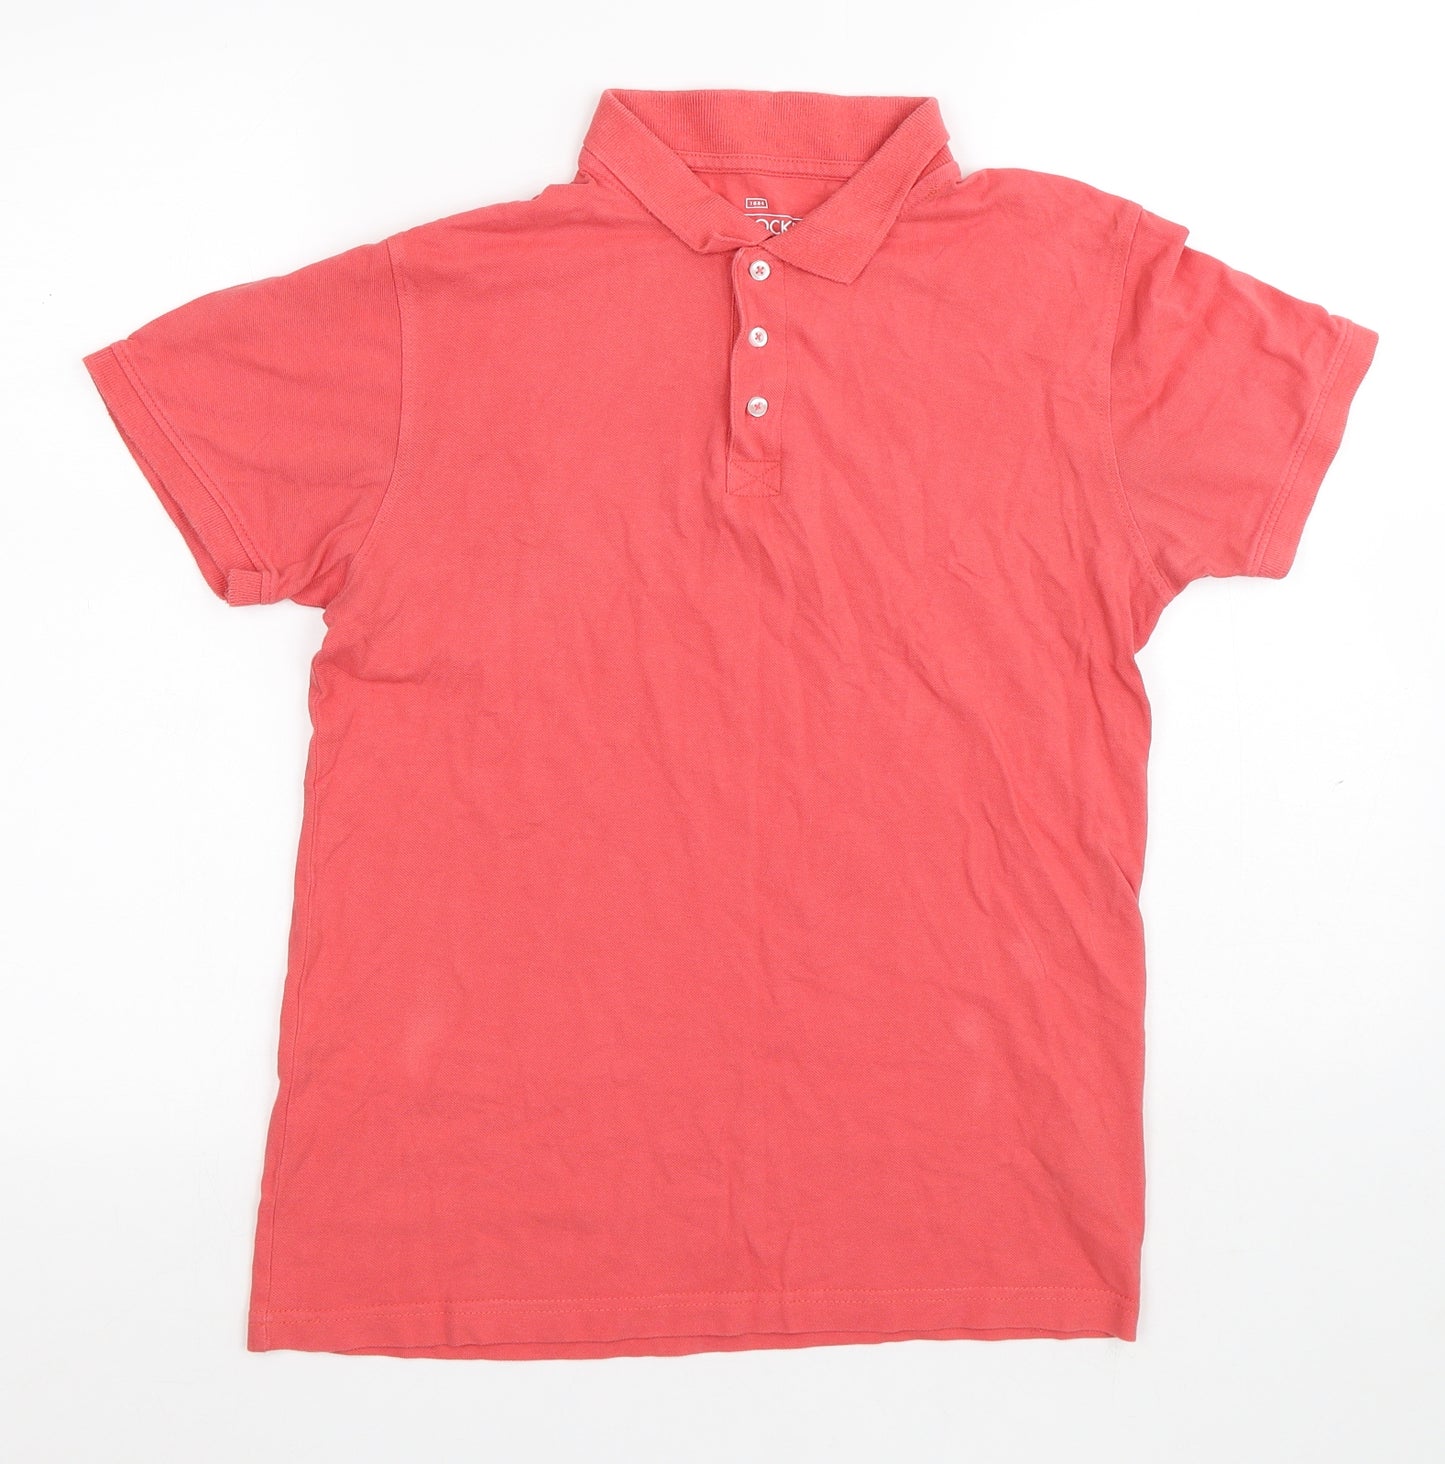 Peacocks Mens Red Cotton Polo Size S Collared Button